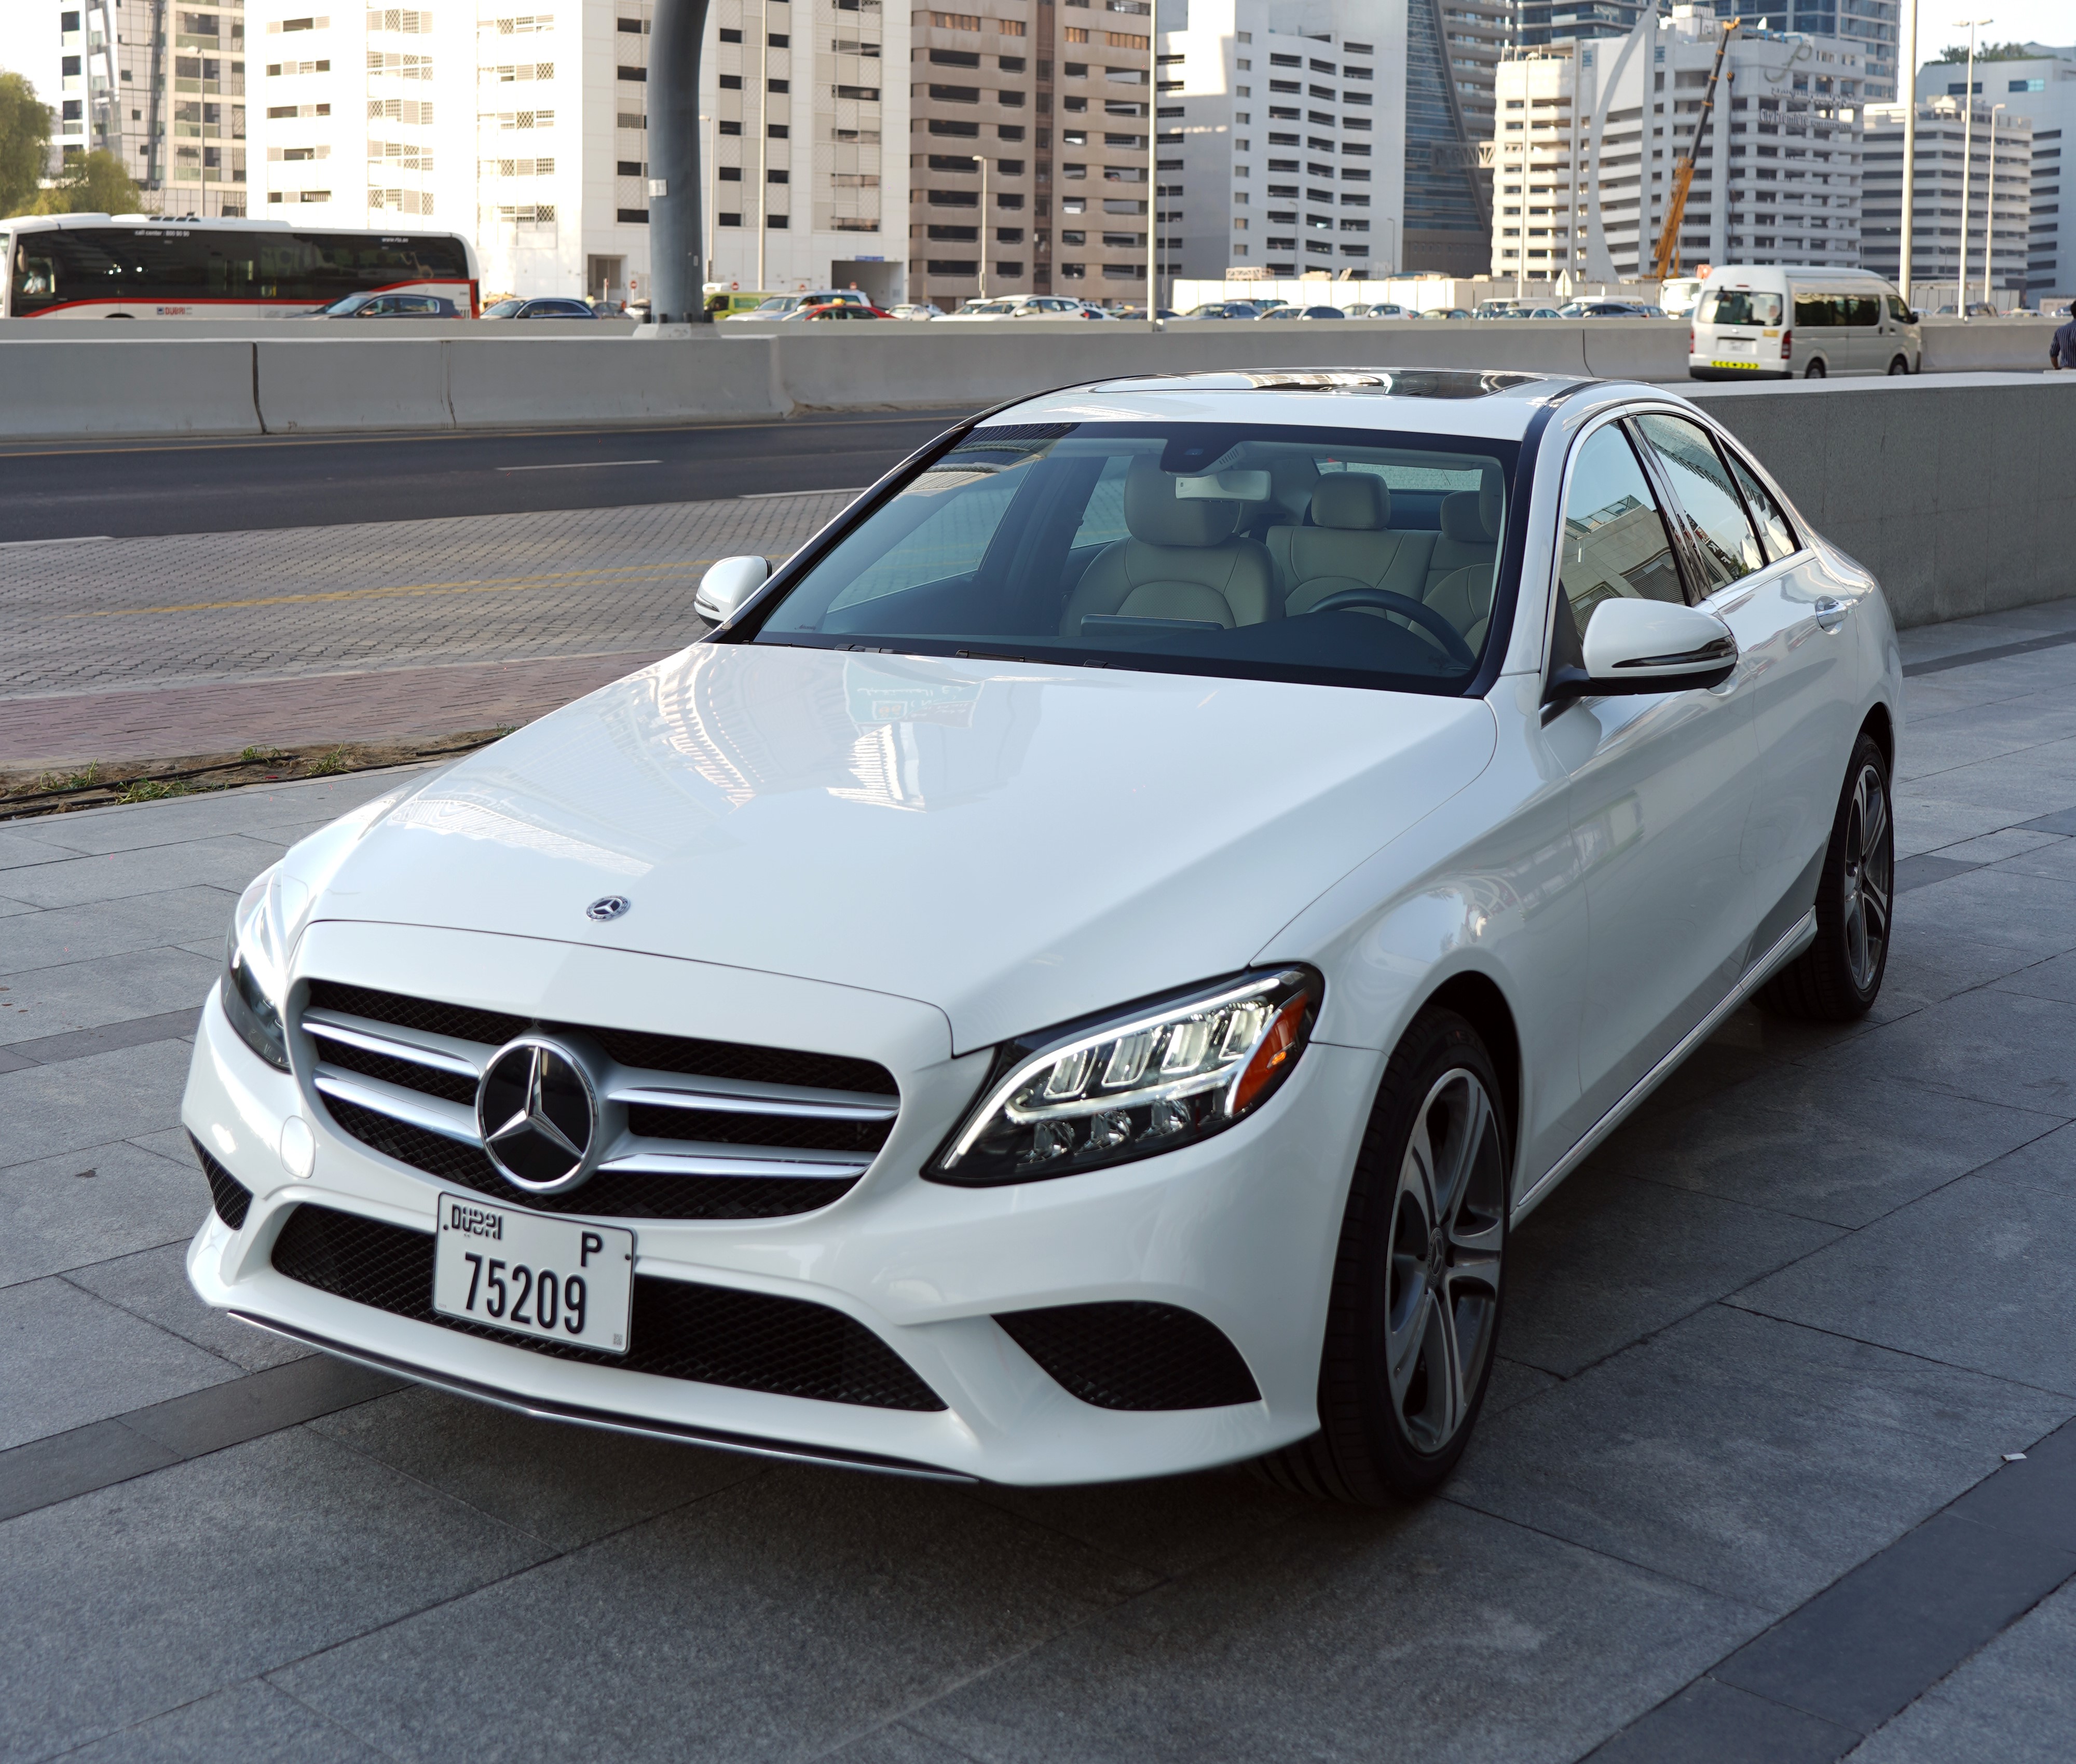 MERCEDES C-CLASS 2019 Listed By Class Cars Rental